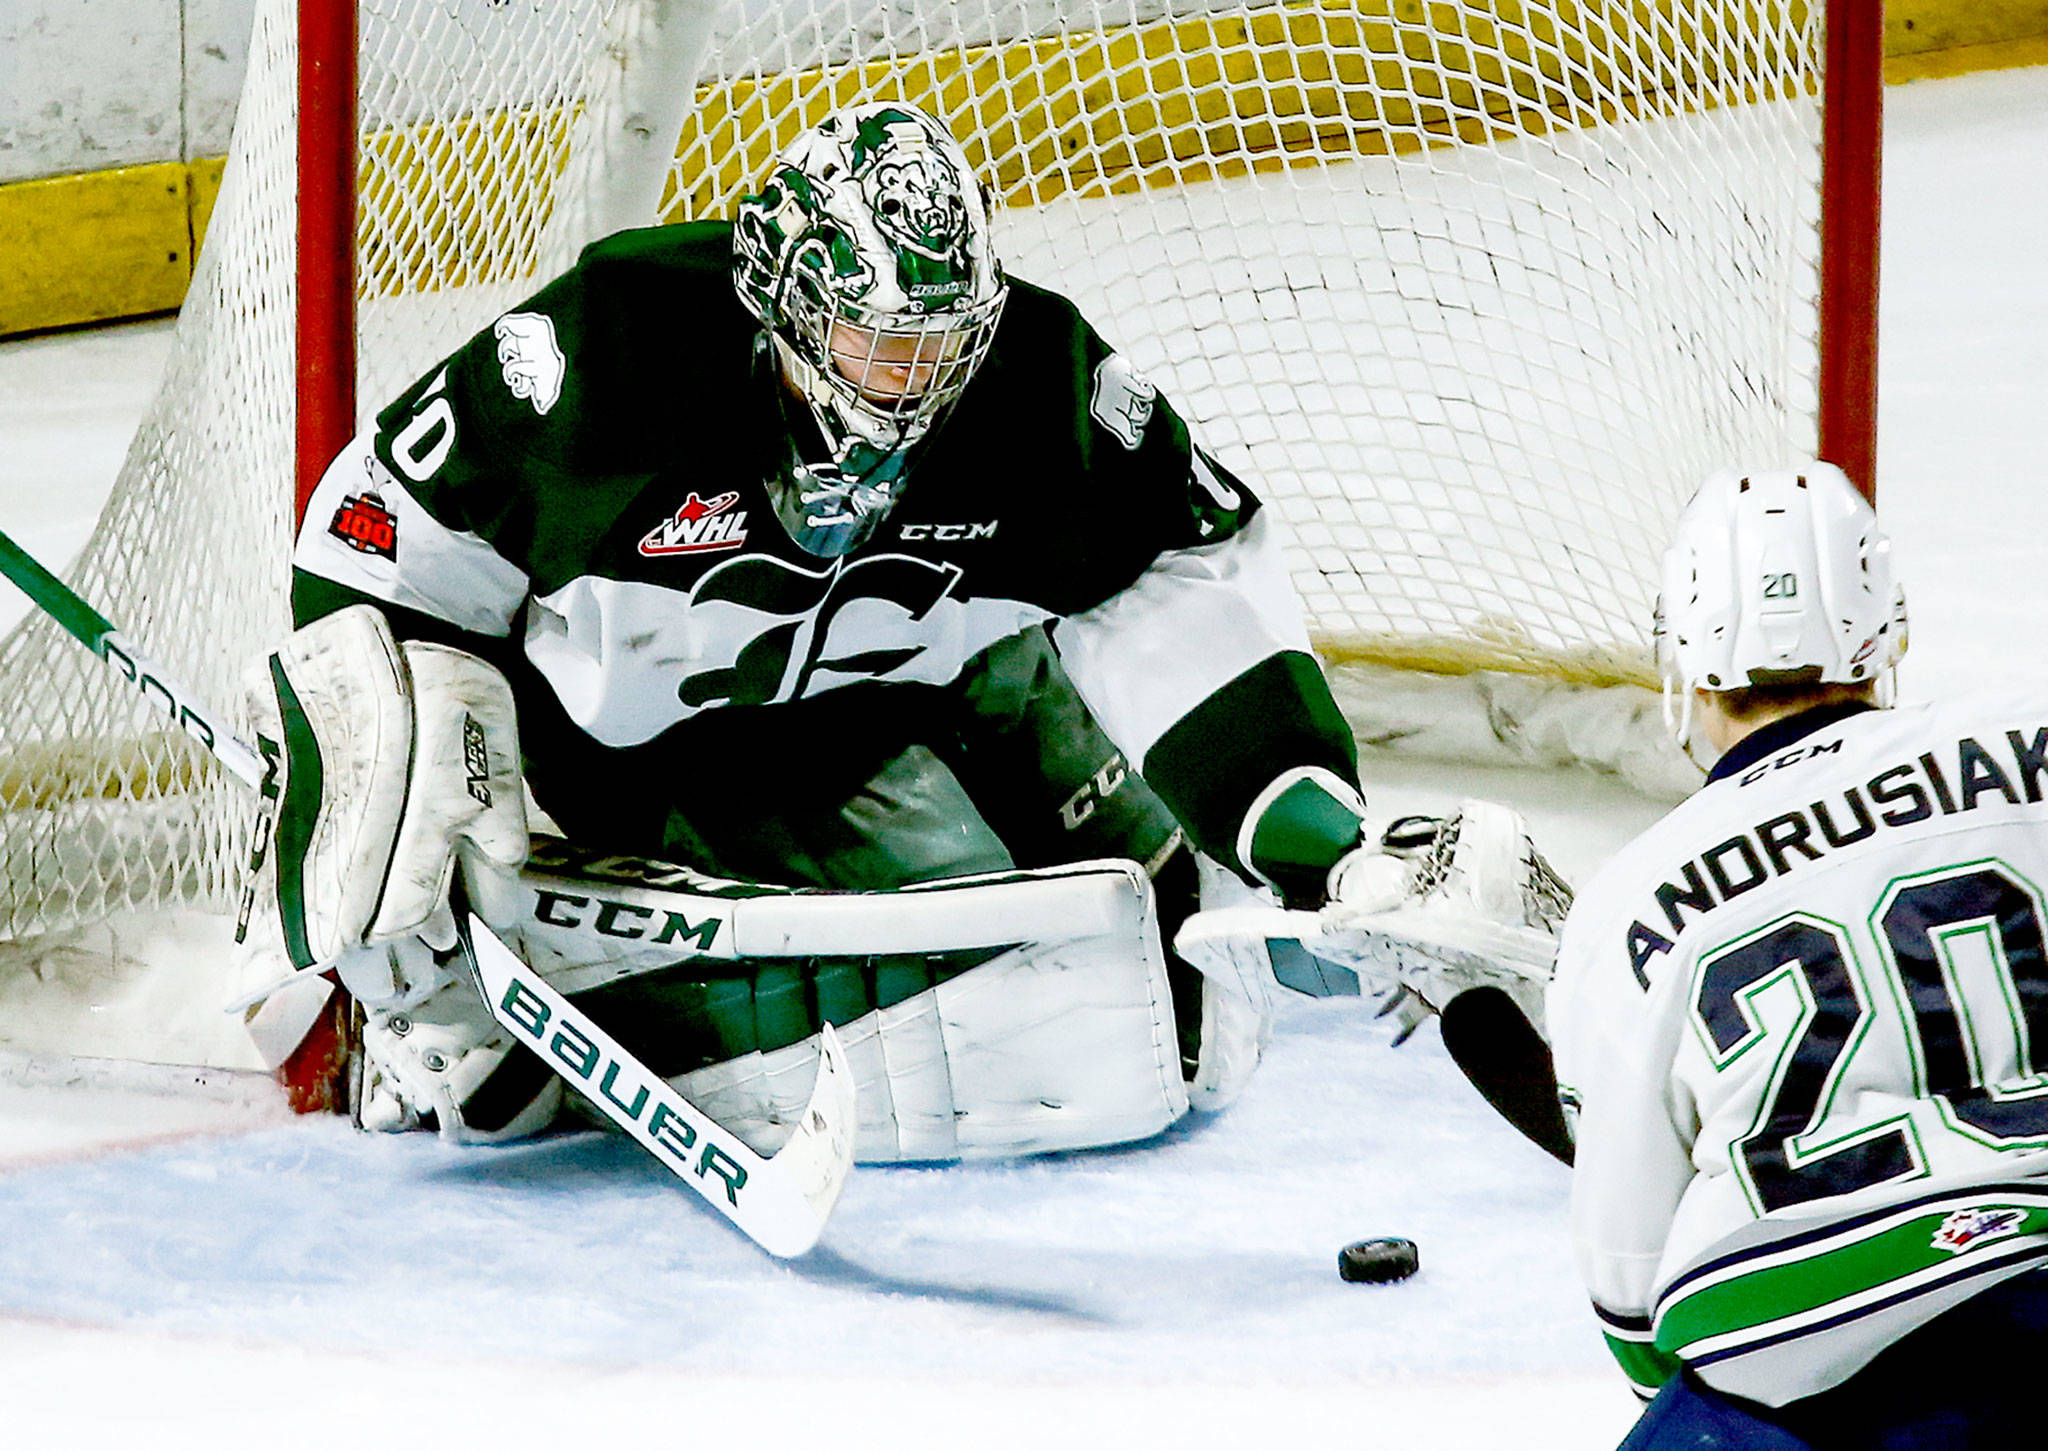 Everett Silvertips goalie Carter Hart eyes the puck during a playoff game against the Seattle Thunderbirds in Kent on March 27. (Ian Terry / The Herald)